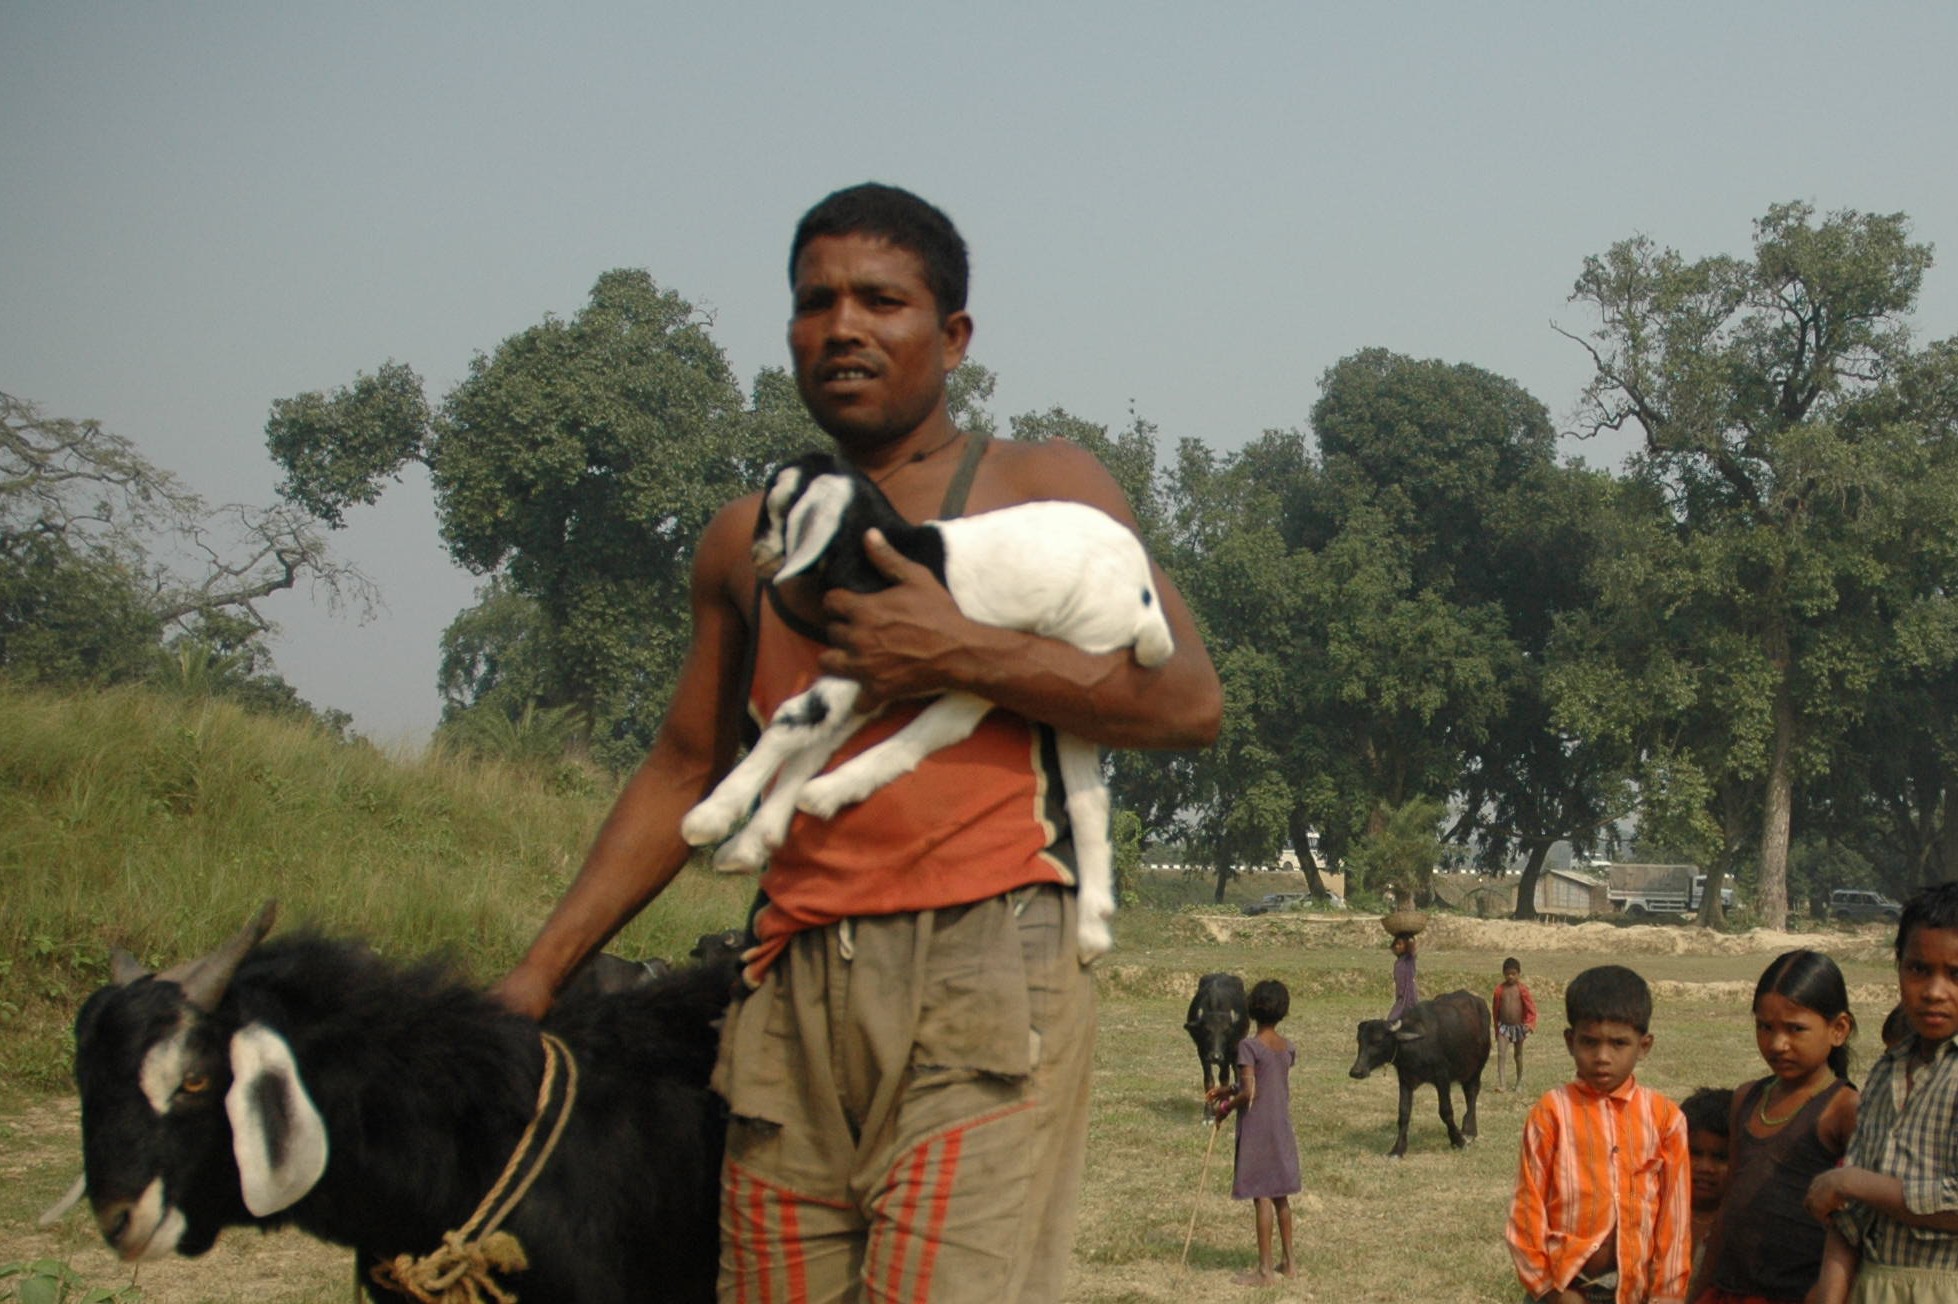 A local man brings his animals to the drill in Bihar, India